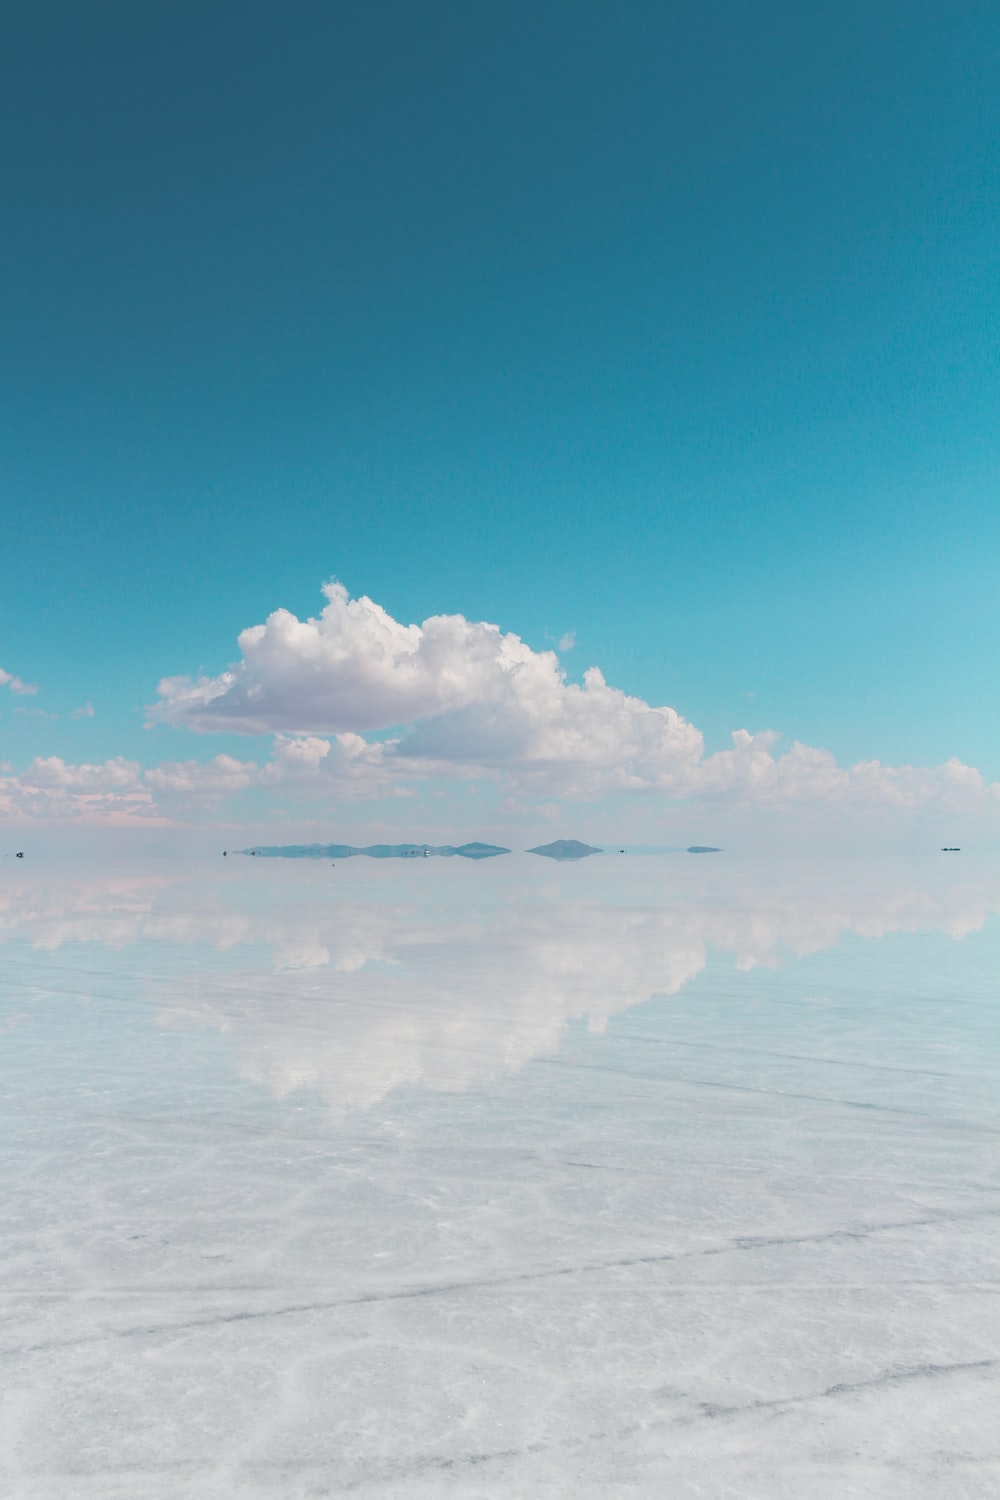 Salt flats pictures download free images on